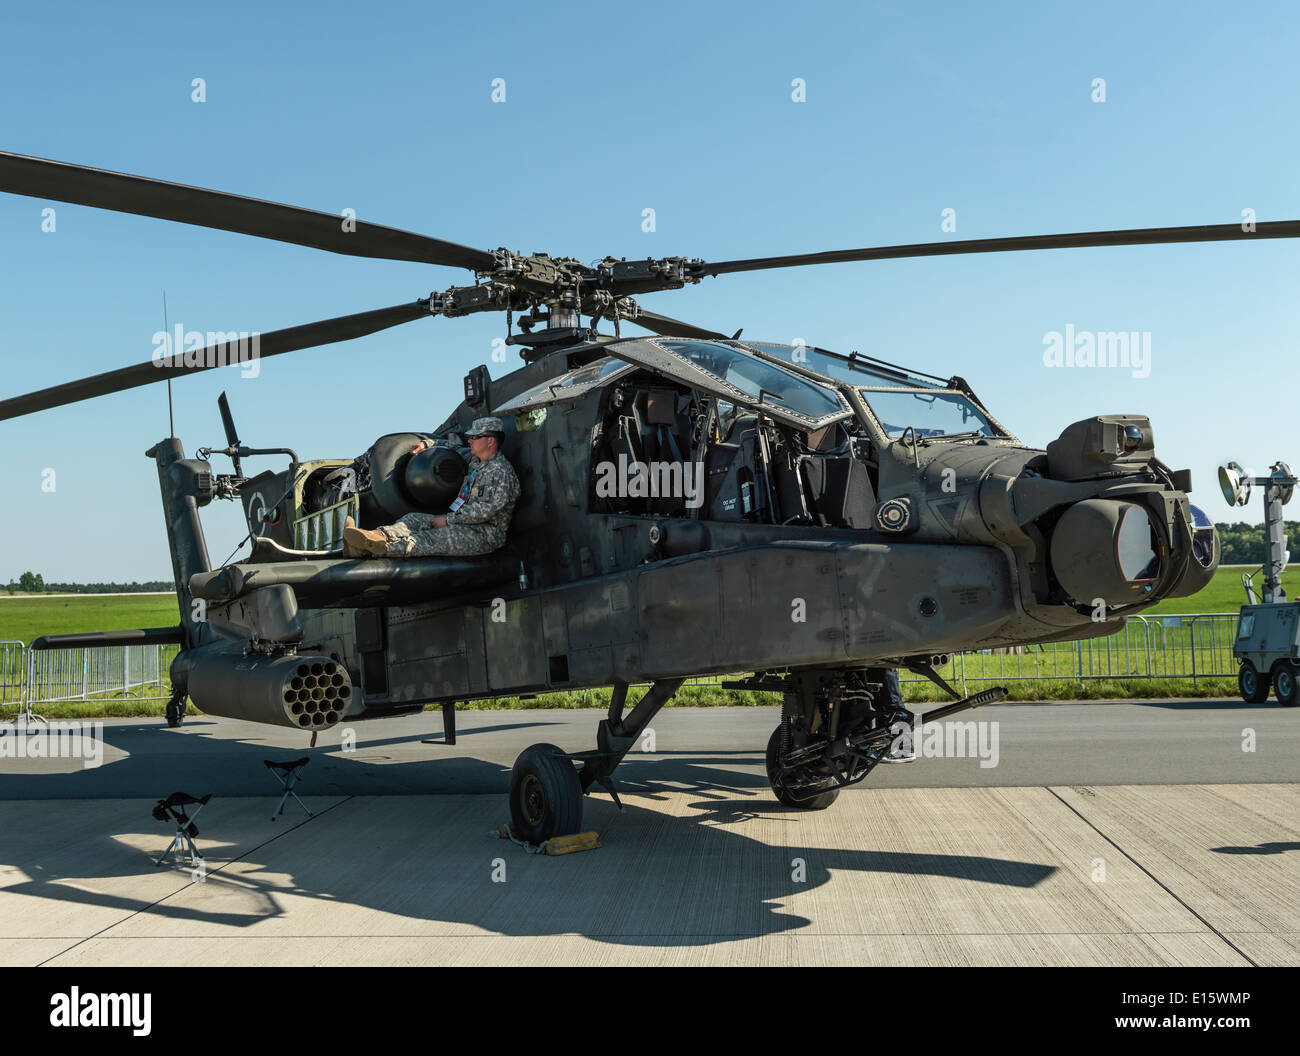 AH-64D Apache attack helicopter on display. Soldier resting in the shadow. Digital mid format shot. Stock Photo